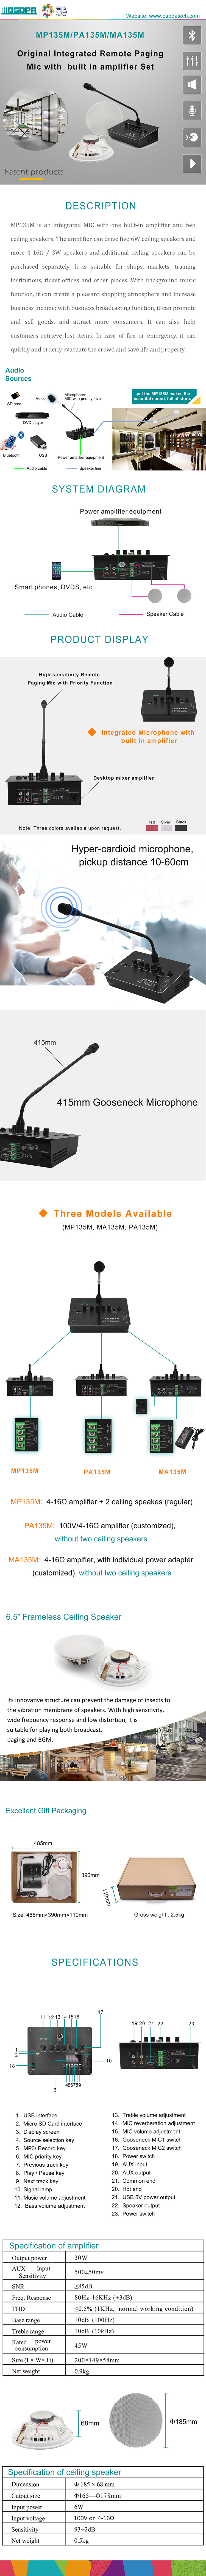 MP135M Integrated Microphone with Built-in Amplifier